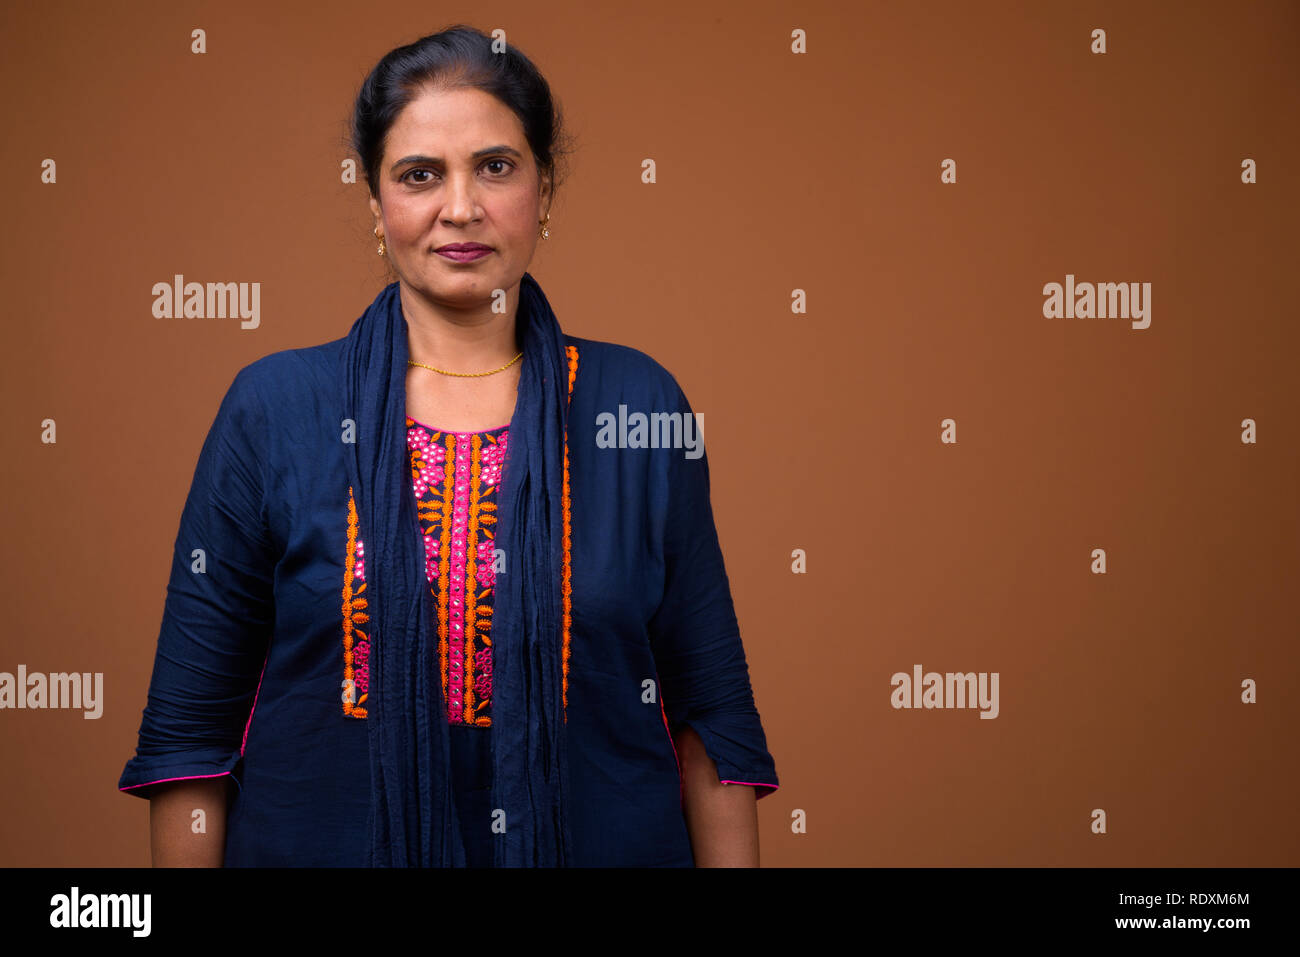 Mature beautiful Indian woman against brown background Stock Photo